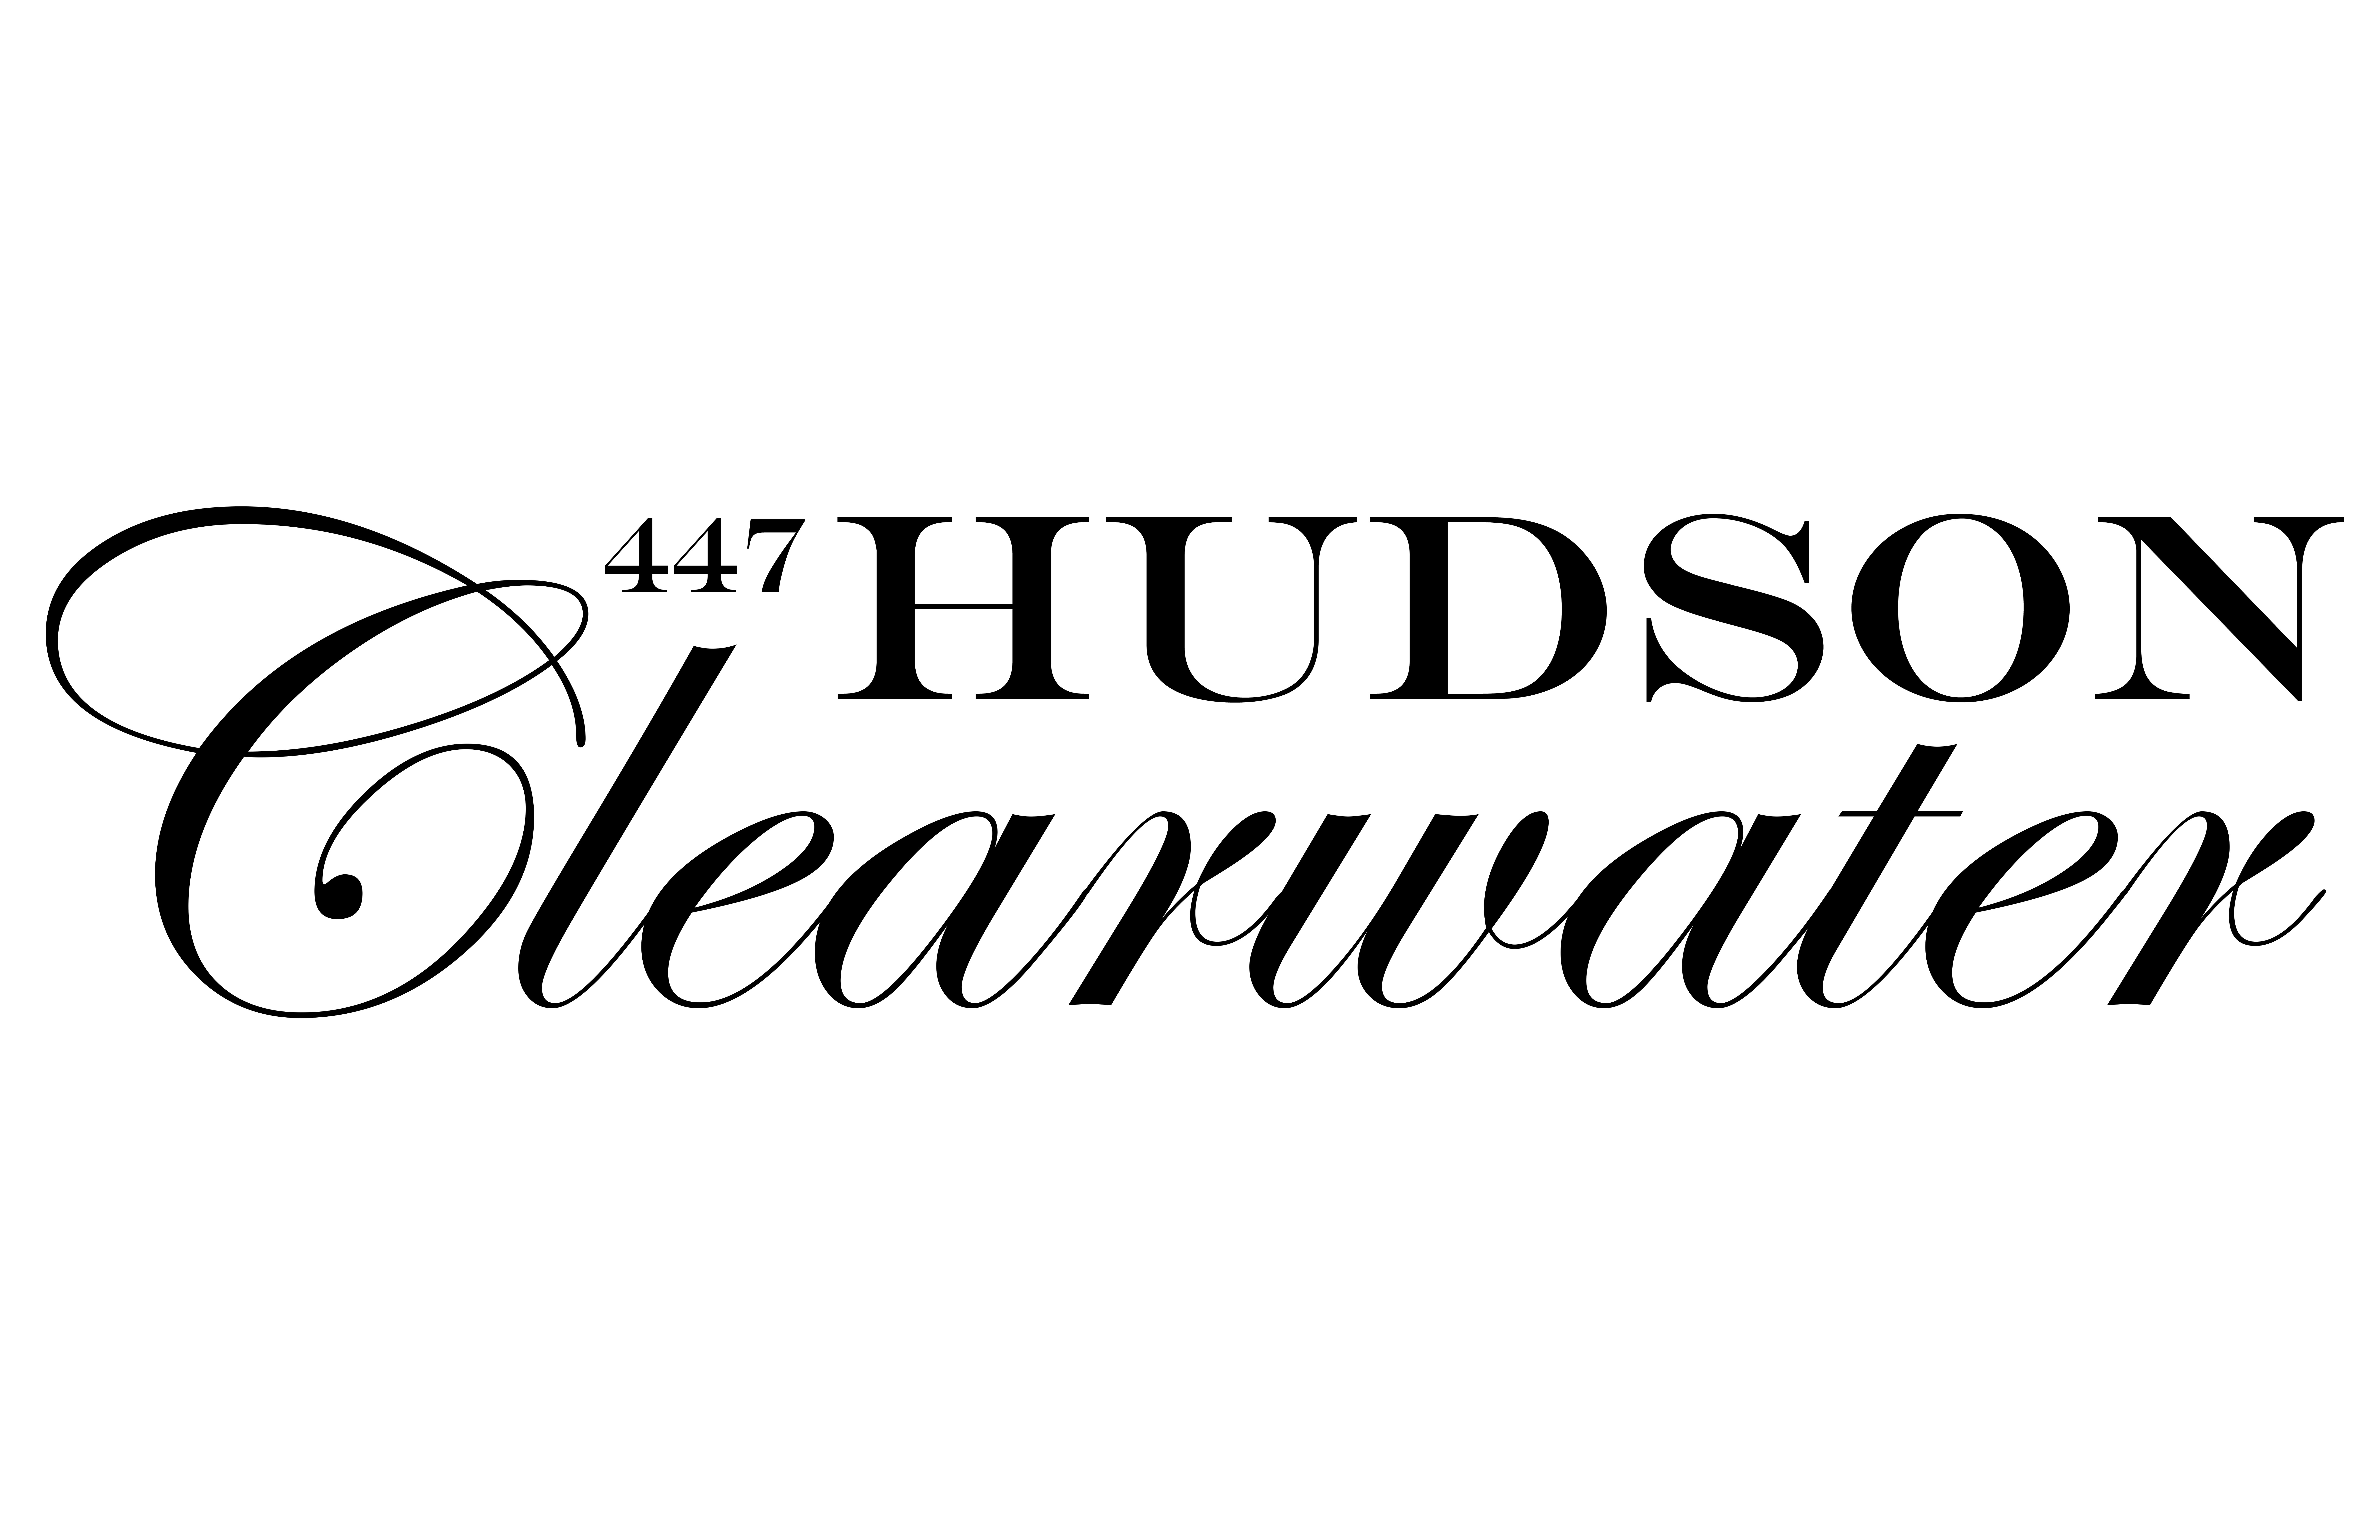 Hudson Clearwater